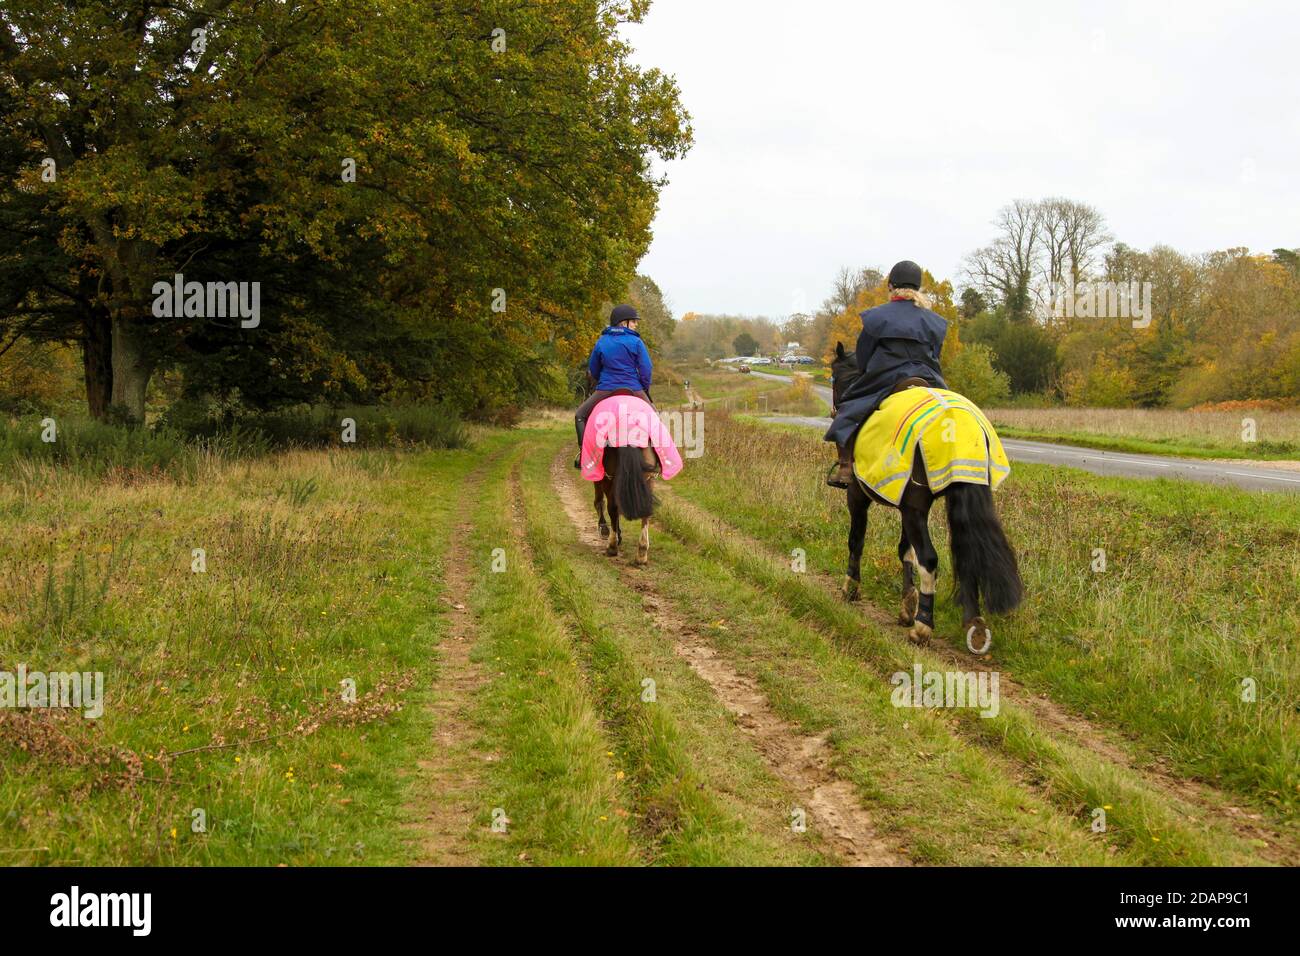 2 people hacking Horse riding from behind in Autumn at Ranmore Common, bridleway, Surrey Hills, England, UK, November 2020 Stock Photo